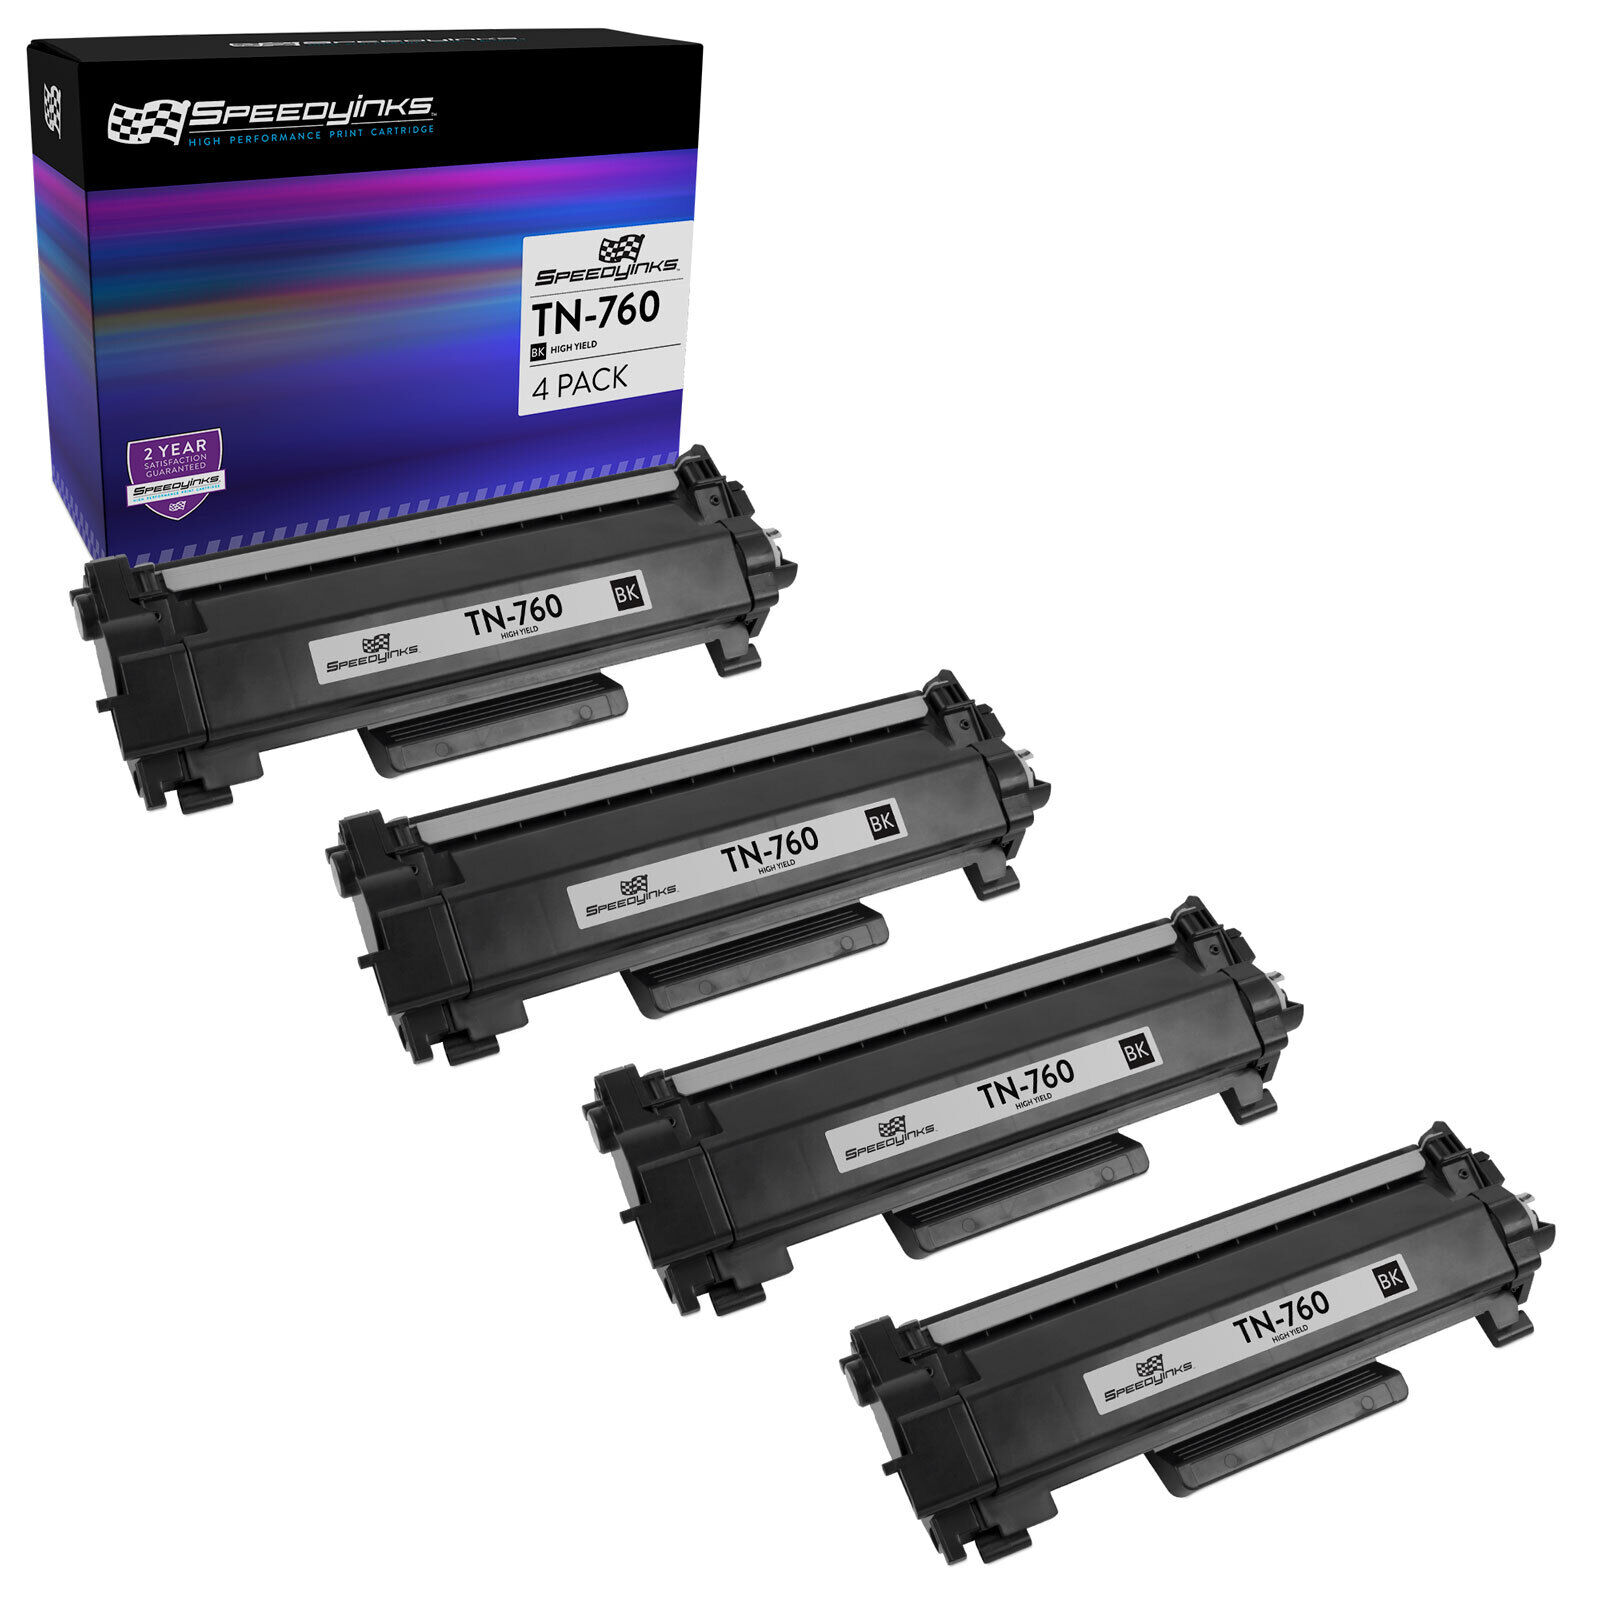 SPEEDYINKS 4PK Replacement for Brother TN760 TN-760 HY Black Toner Cartridges